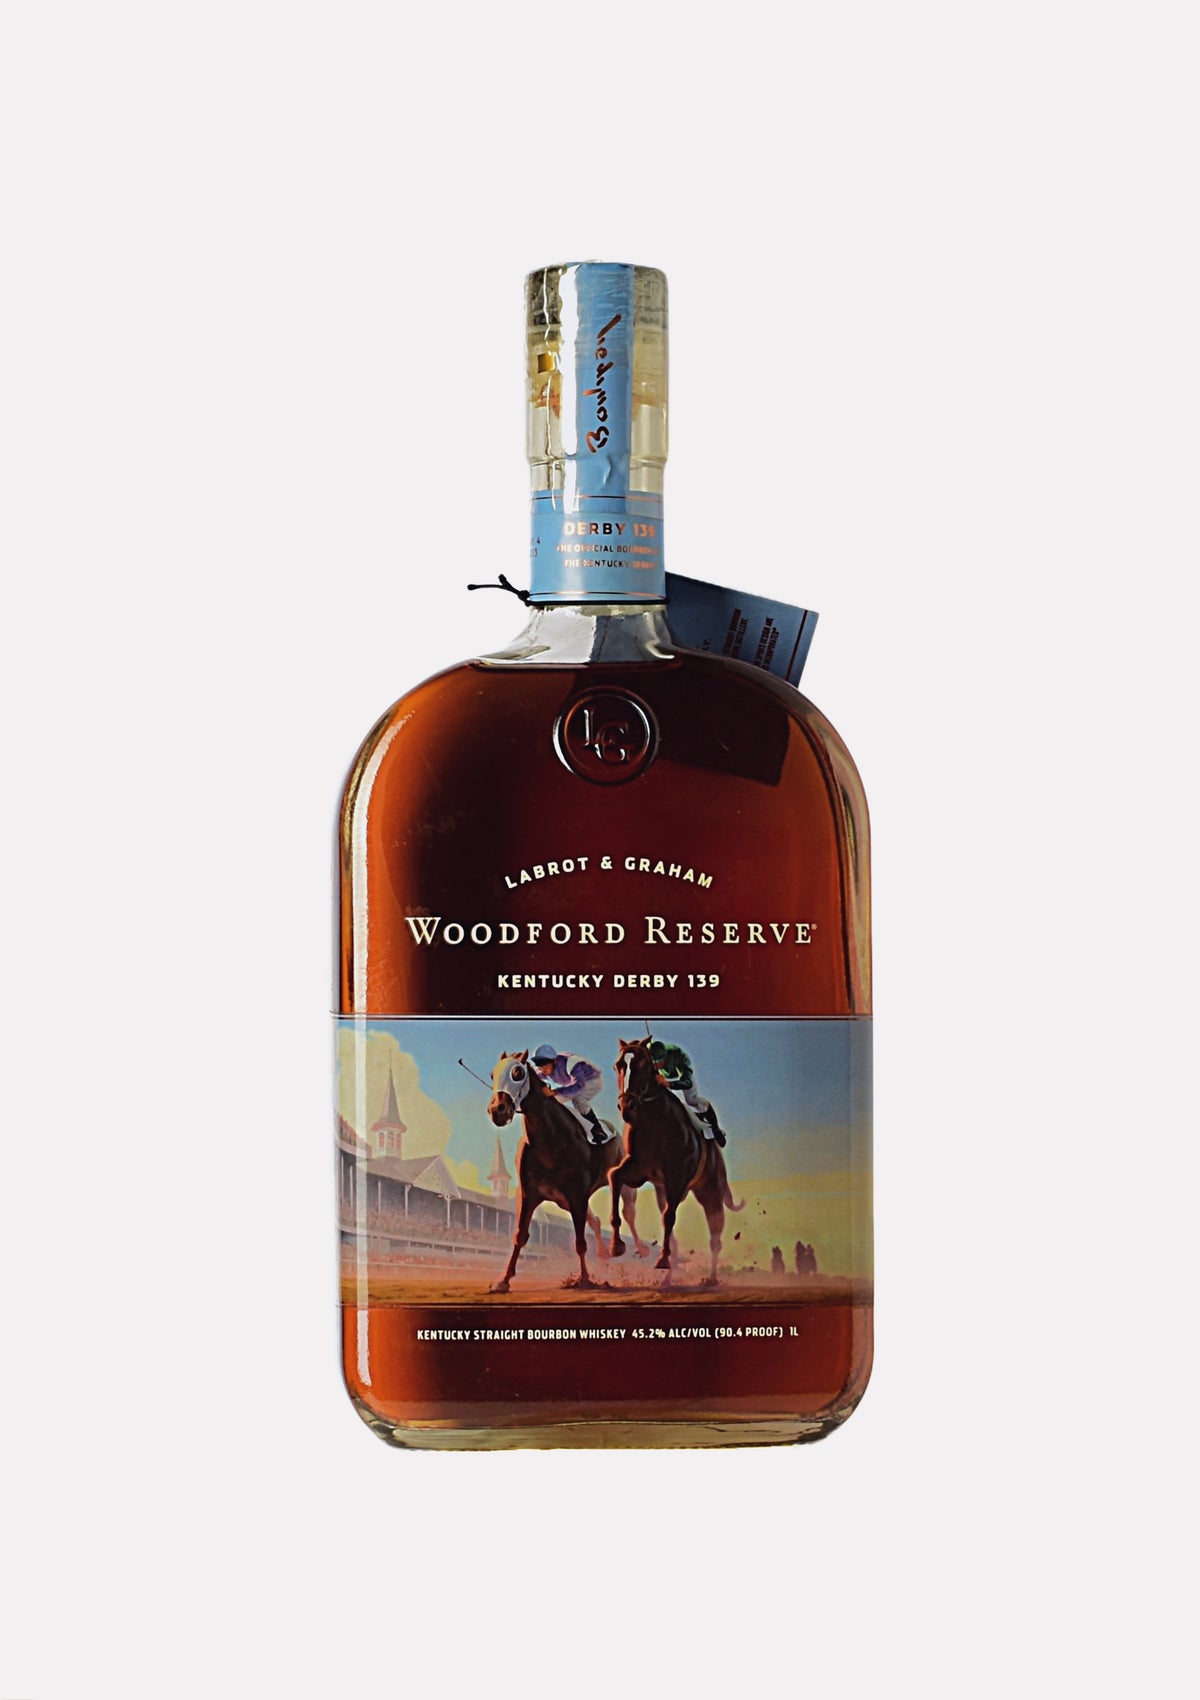 Woodford Reserve Kentucky Derby 139